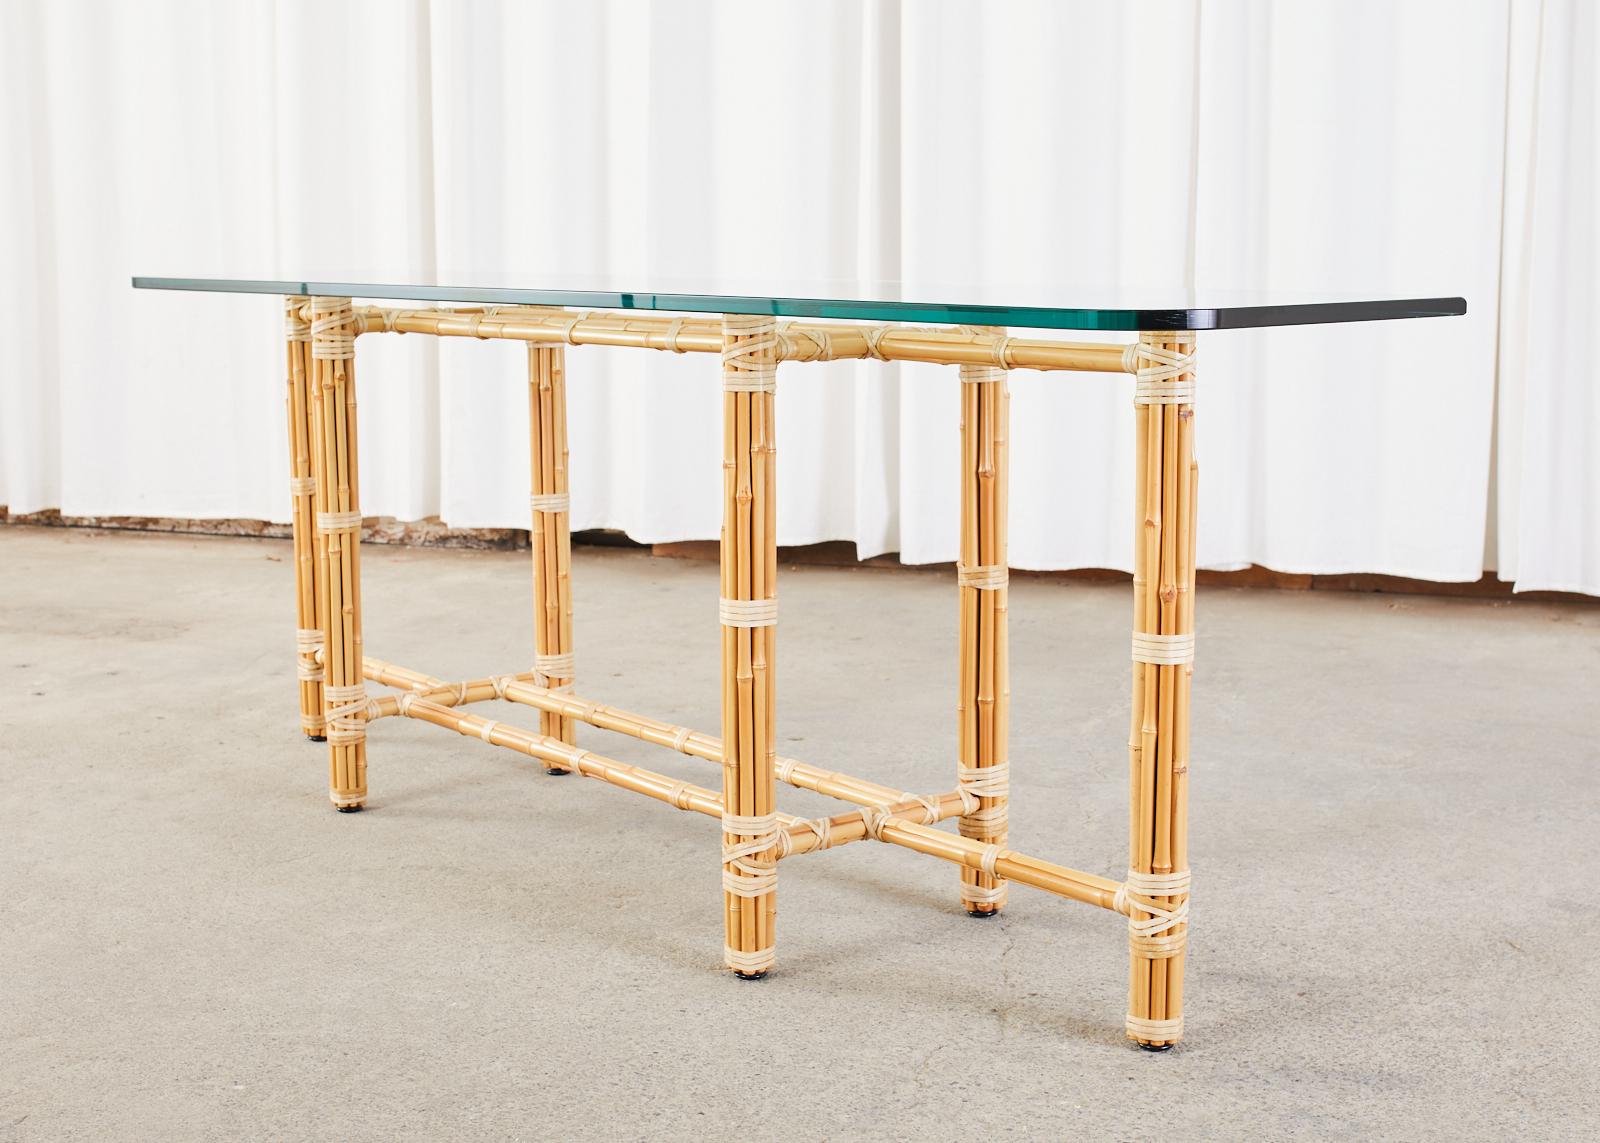 Elongated McGuire console table or sofa table made in the California organic modern style. The long rectangular table features an iron base wrapped with blonde bamboo poles lashed together with leather rawhide laces topped with a very thick pane of